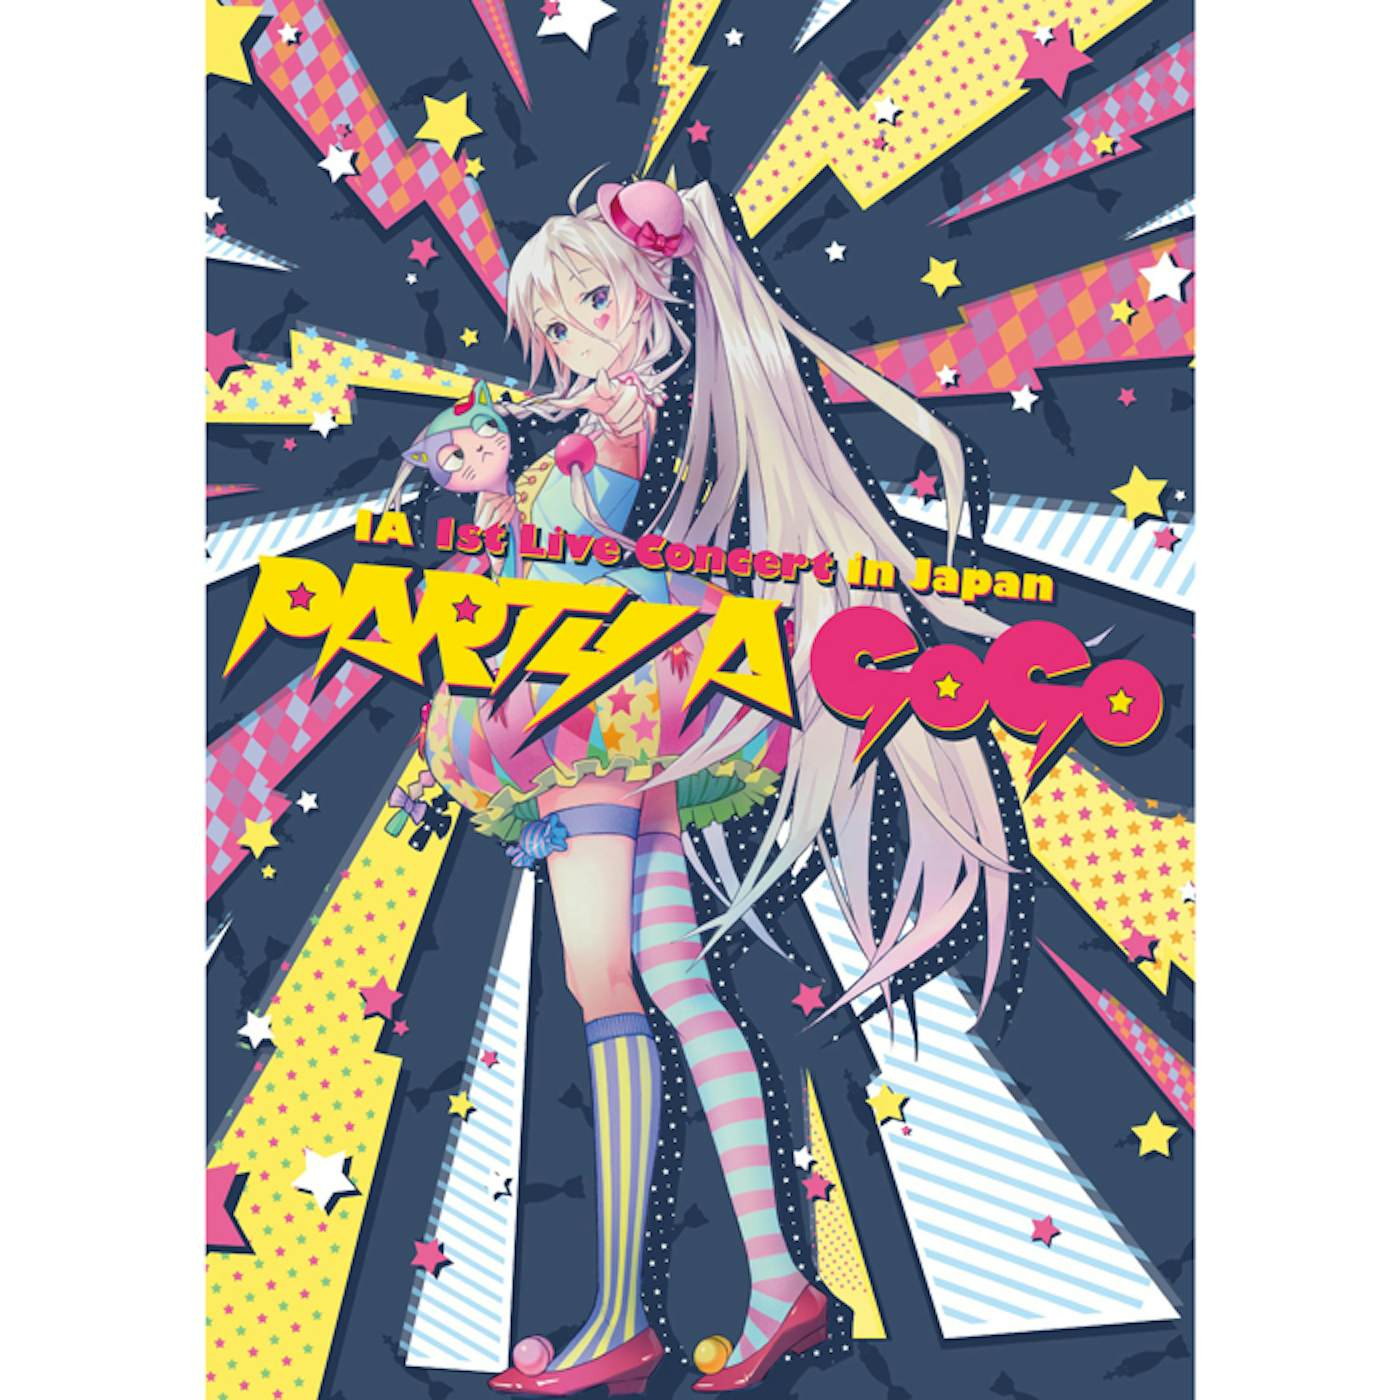 IA 1st Live Concert in Japan "PARTY A GO-GO" [DVD]